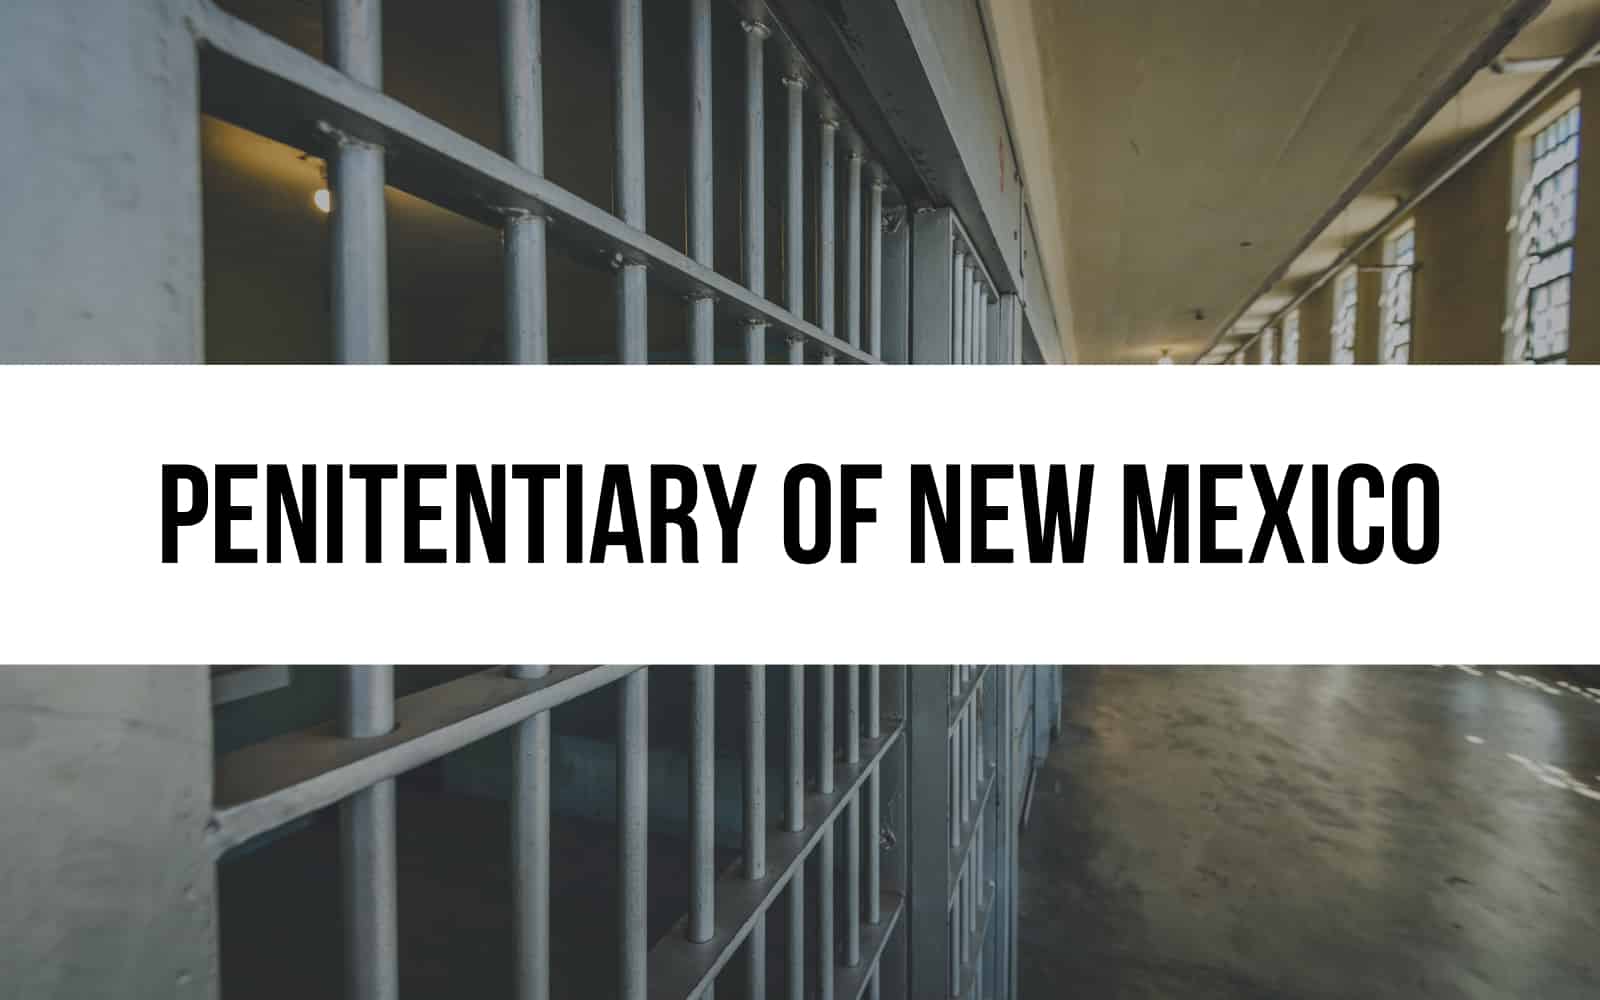 Penitentiary of New Mexico